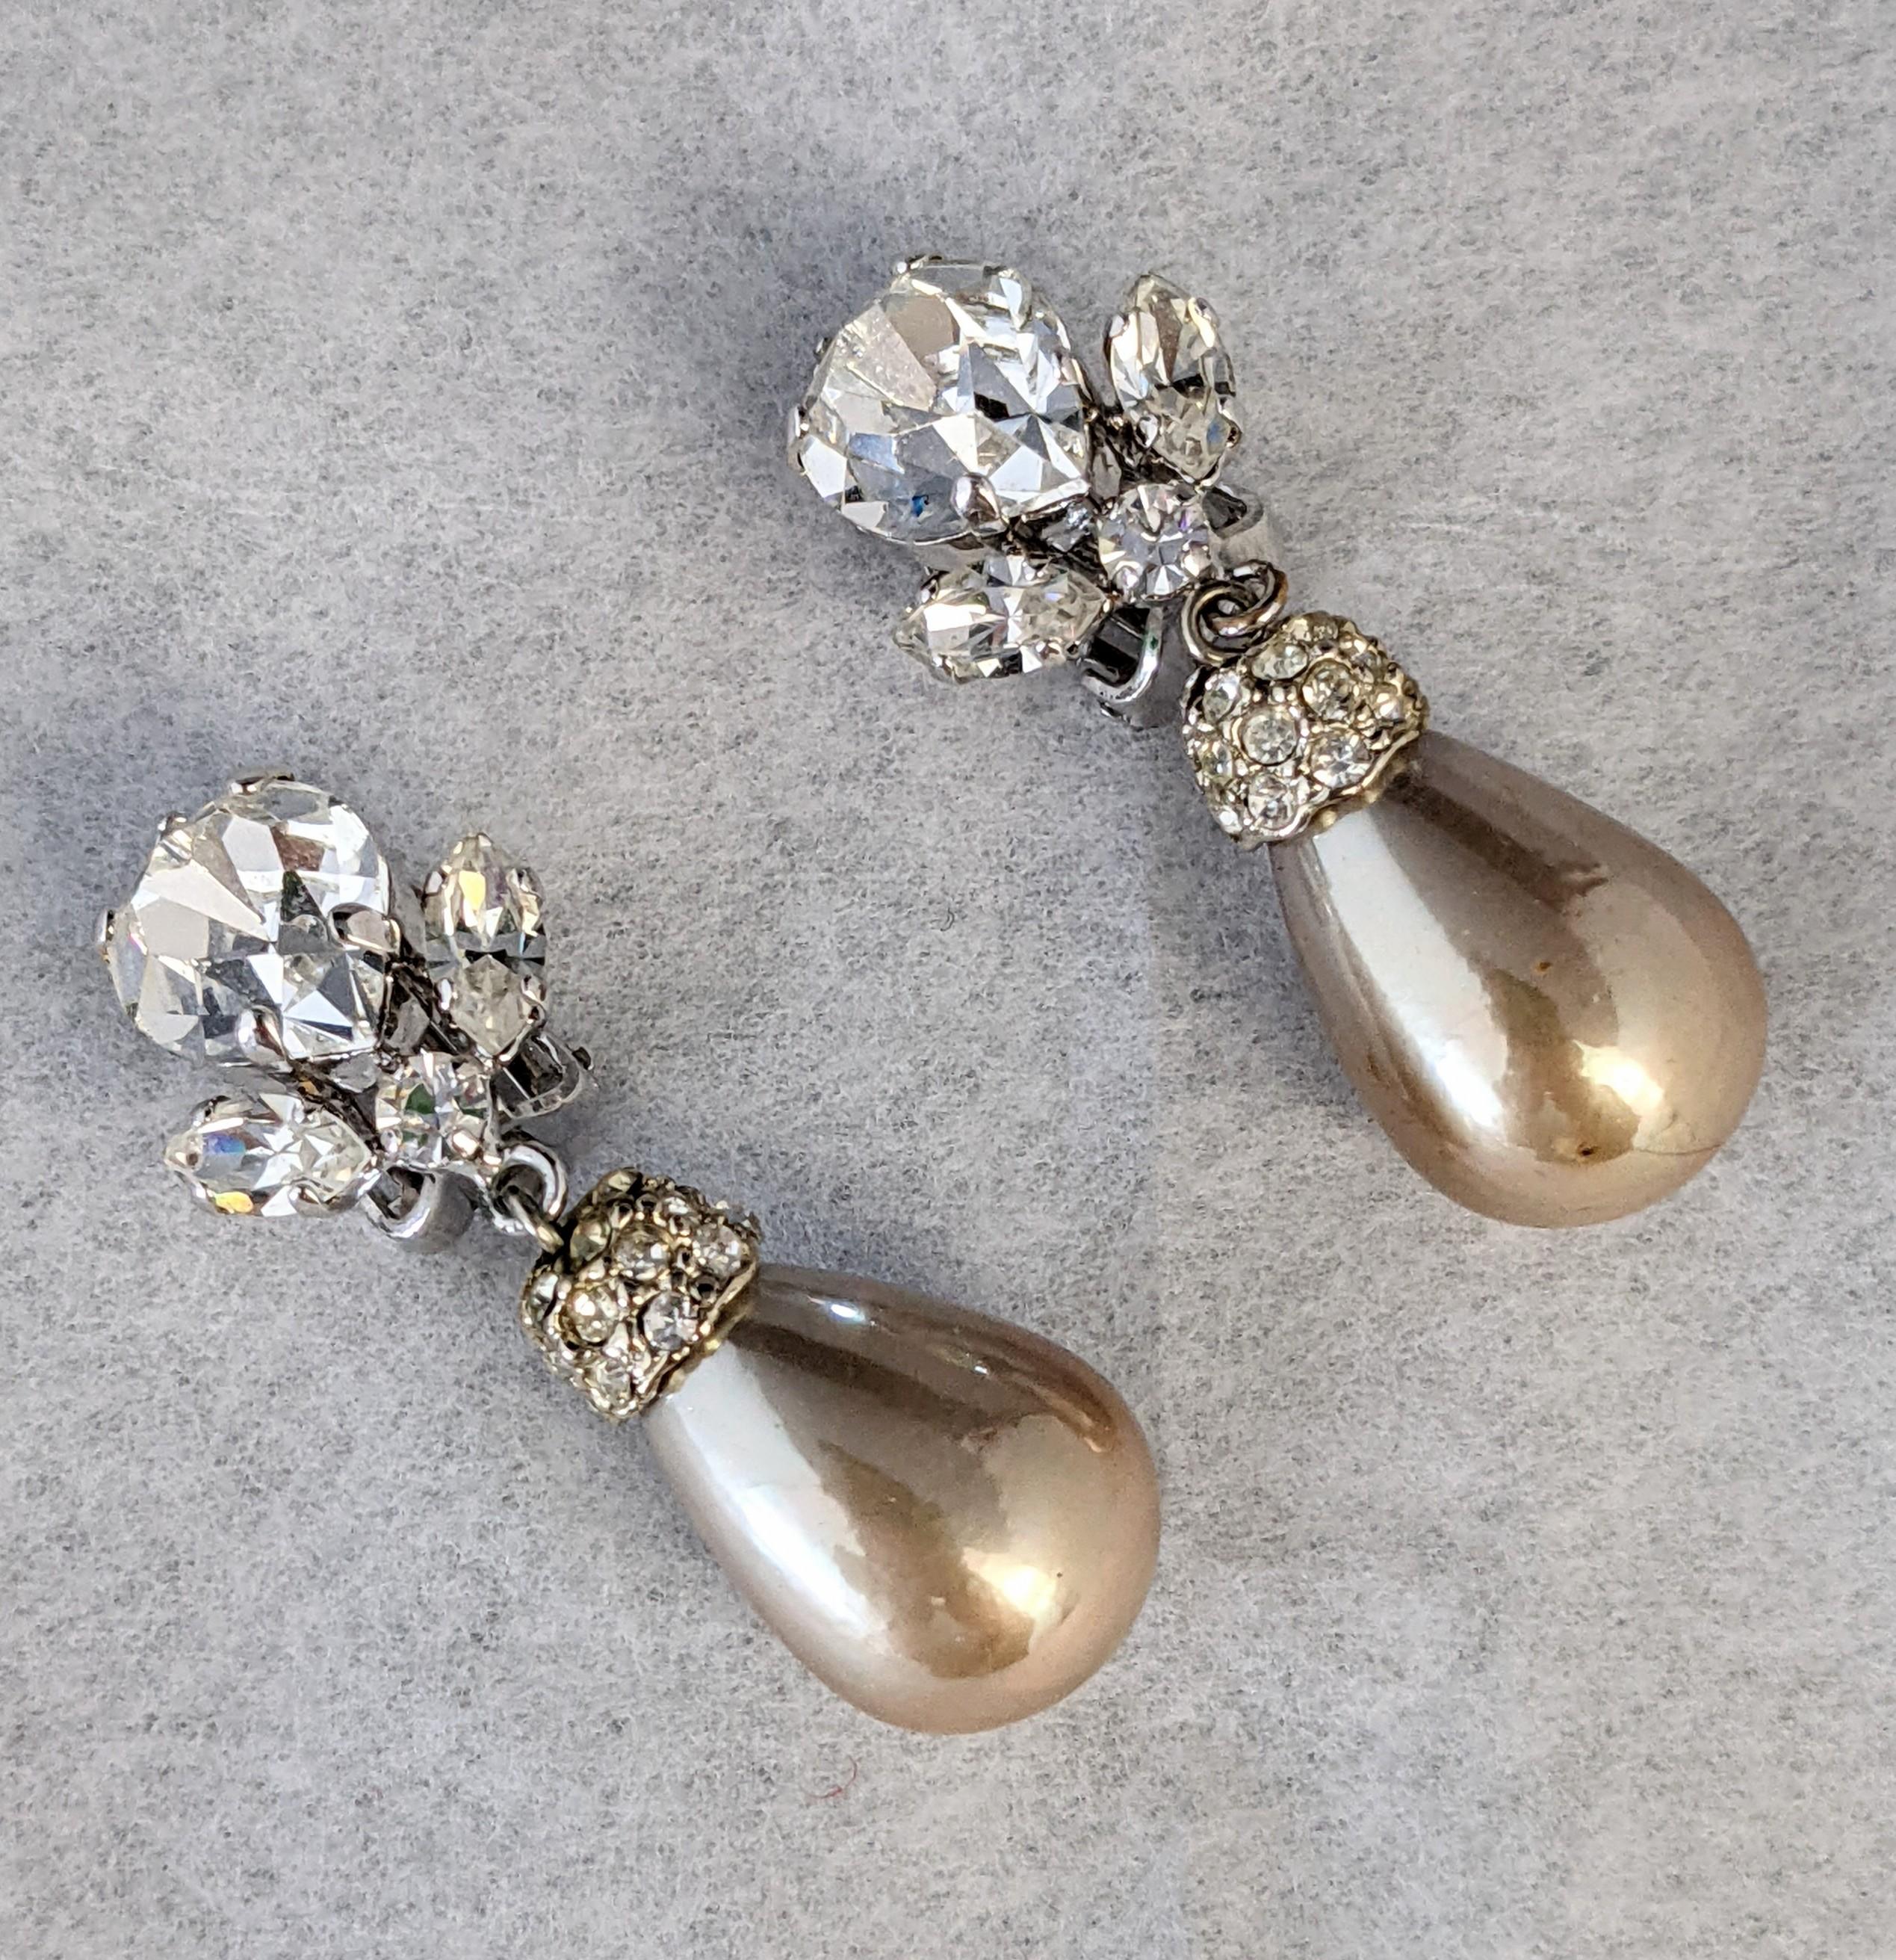 Heart Shaped Crystal Earrings, B. Cook, London In Excellent Condition For Sale In New York, NY